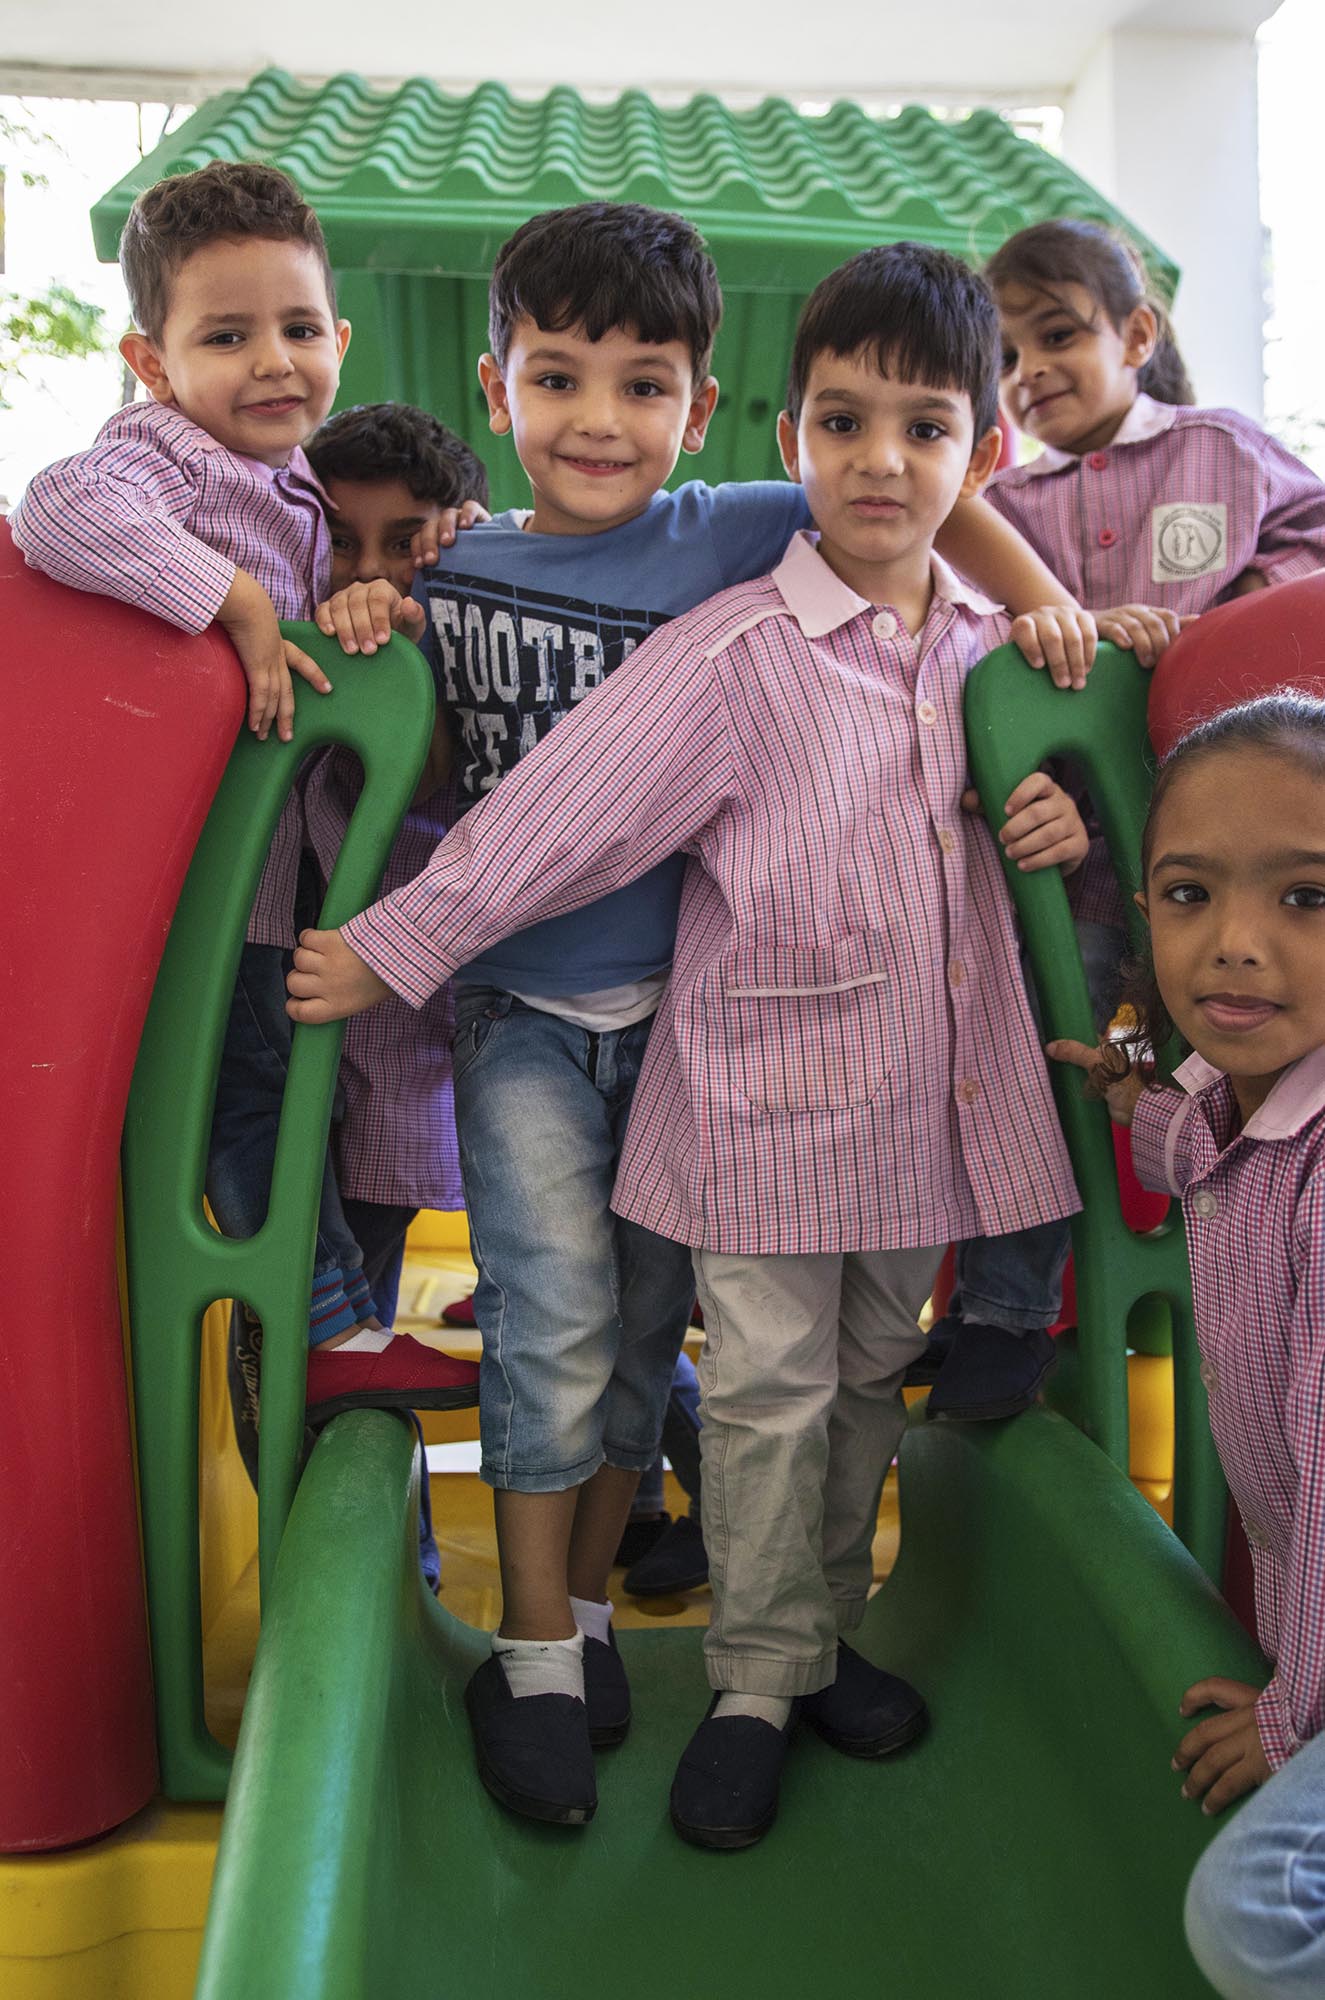 Preschoolers in the playground of Beddawi Camp in Lebanon picks up brand new TOMS shoes.